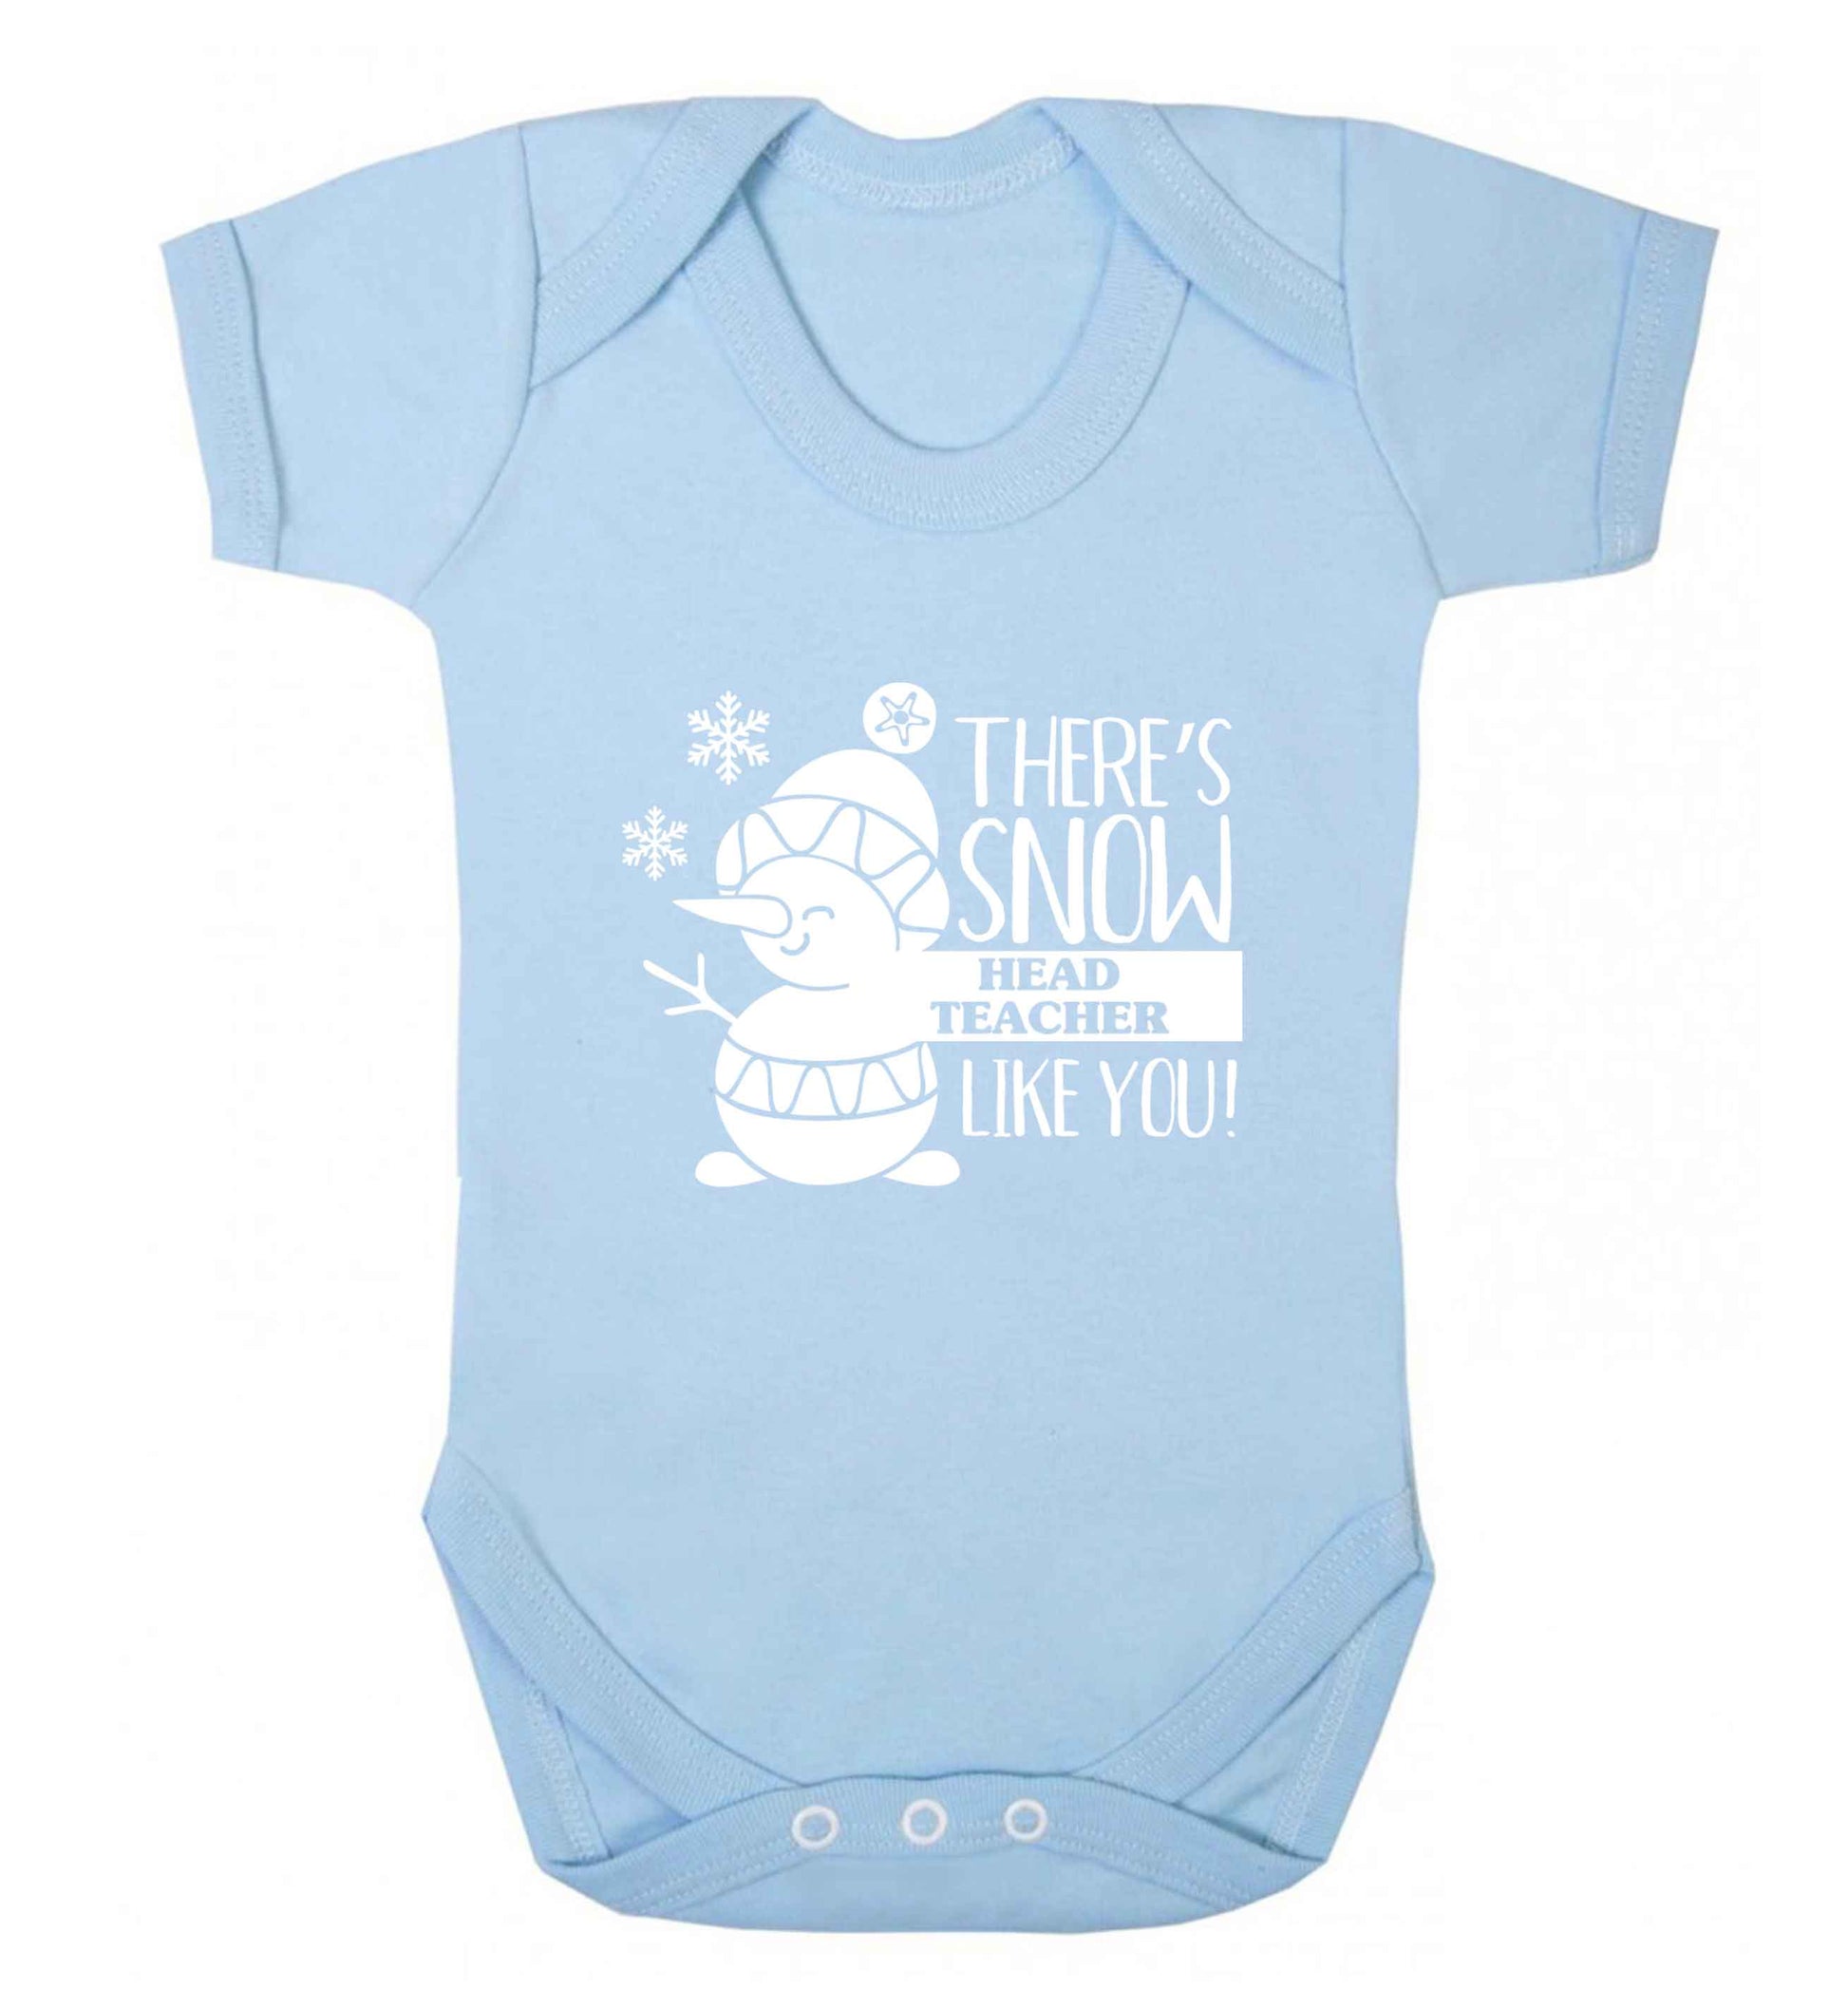 There's snow head teacher like you baby vest pale blue 18-24 months